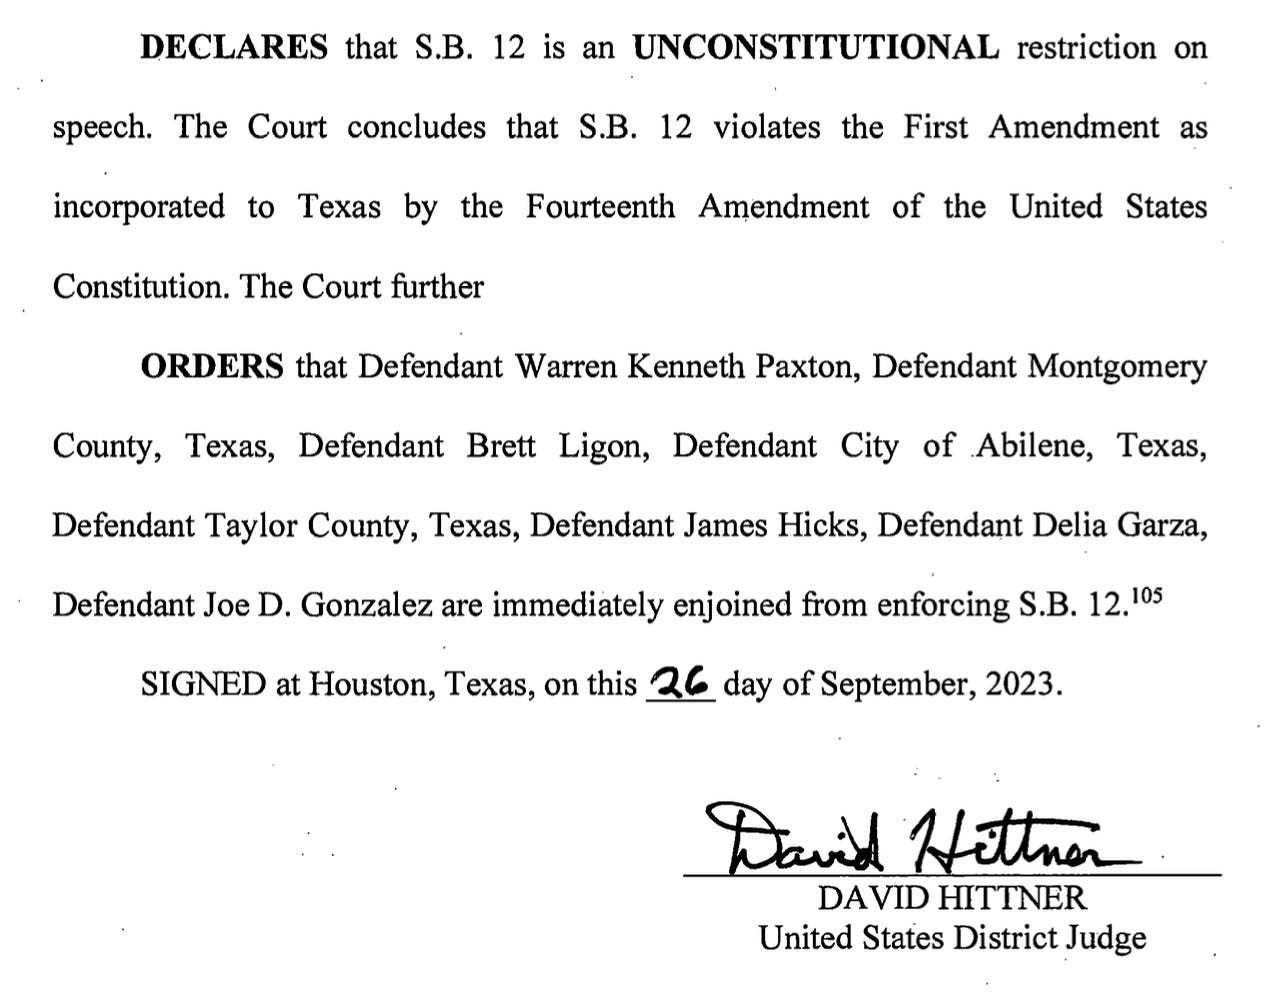 DECLARES that S.B. 12 is an UNCONSTITUTIONAL restriction on speech. The Court concludes that S.B. 12 violates the First Amendment as incorporated to Texas by the Fourteenth Amendment of the United States Constitution. The Court further ORDERS that Defendant Warren Kenneth Paxton, Defendant Montgomery County, Texas, Defendant Brett Ligon, Defendant City of .Abilene, Texas, Defendant Taylor County, Texas, Defendant James Hicks, Defendant Delia Garza, Defendant Joe D. Gonzalez are immediately enjoined from enforcing S.B. 12.105 SIGNED at Houston, Texas, on this ~C. day of September, 2023. DAYID HITTNER United States District Judge